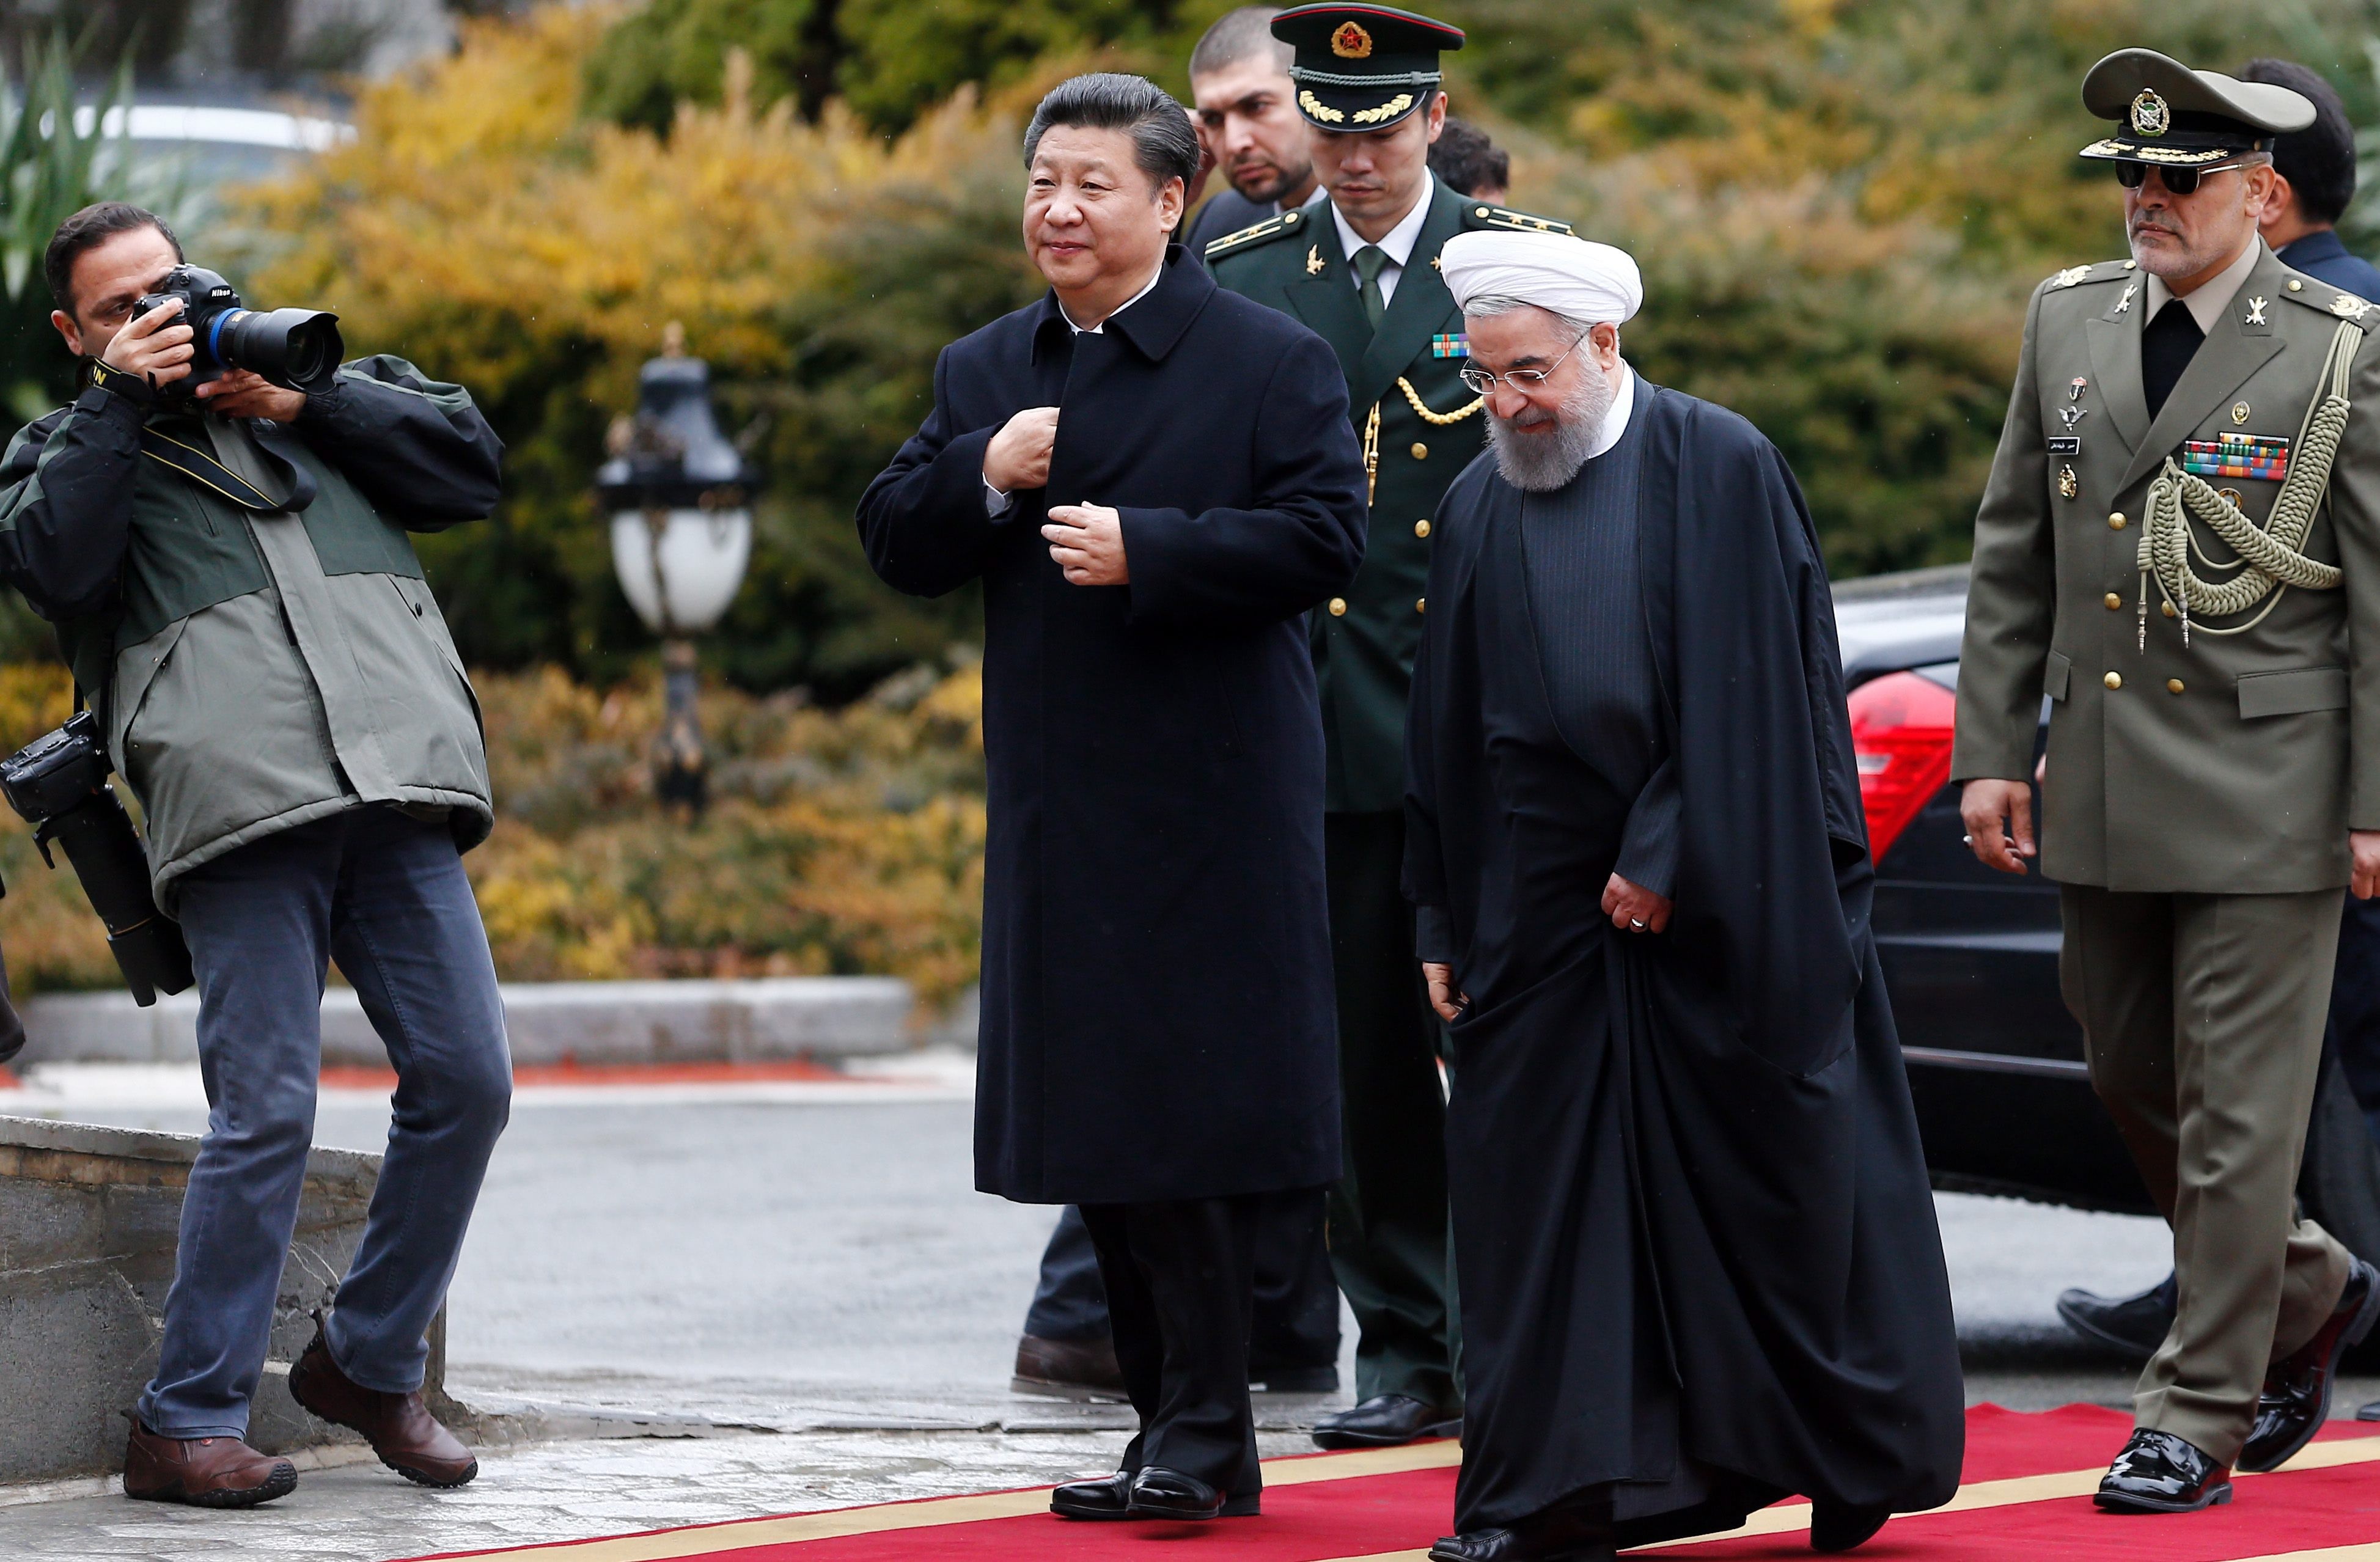 Iranian President Hassan Rowhnai and his Chinese counterpart Xi Jinping meet at a welcome ceremony at the presidential palace in Tehran in January 2016. Iran is one of the biggest suppliers of crude oil to energy-hungry China, and a war between Iran and the US would threaten China’s supply from the Middle East as a whole. Photo: EPA